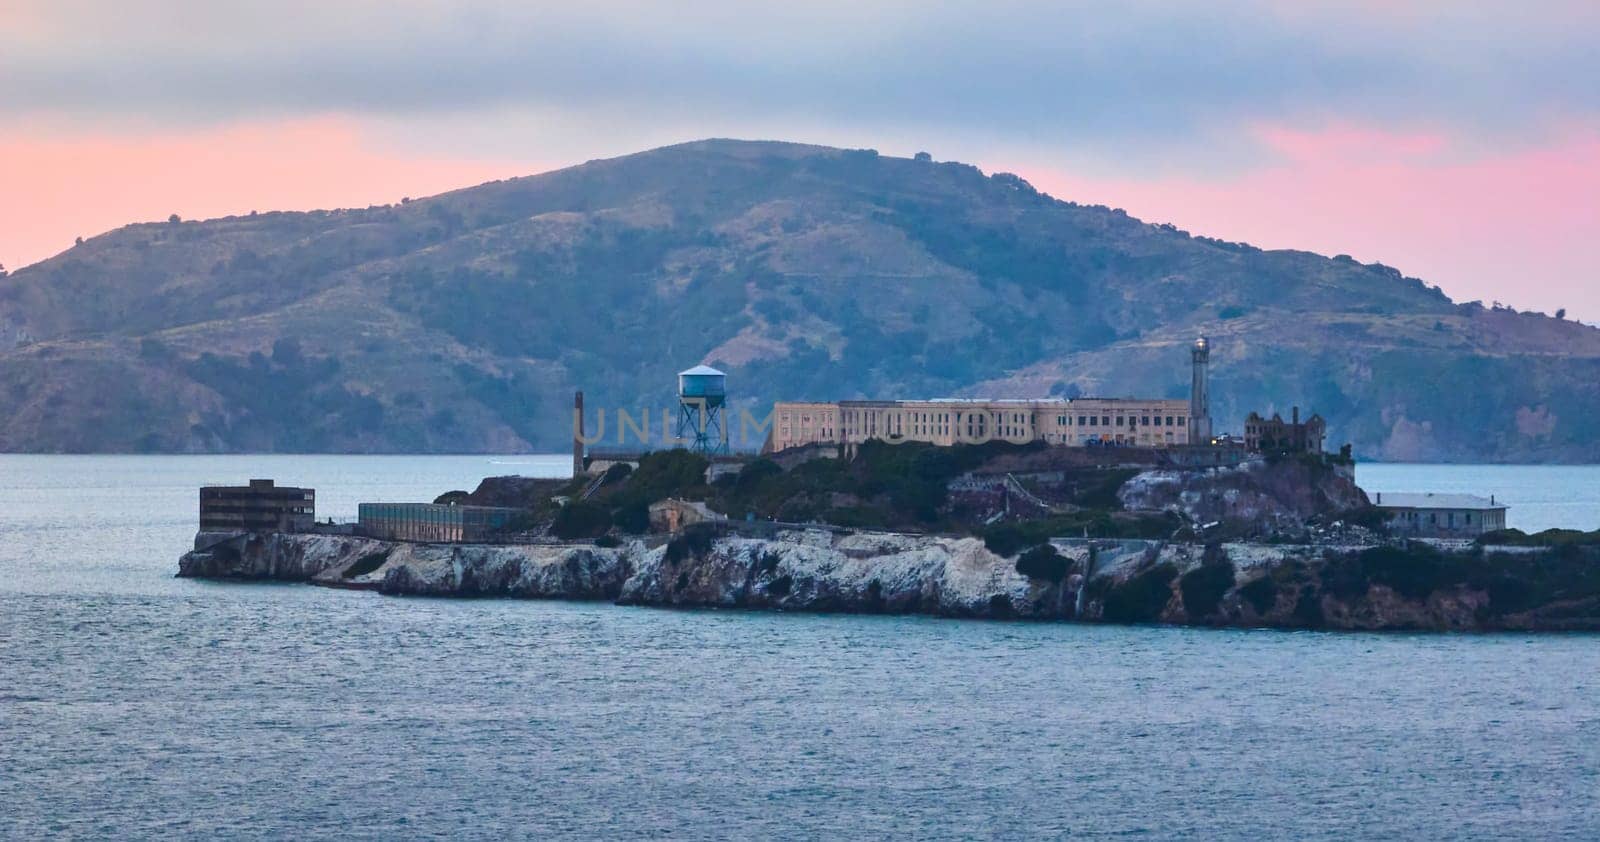 Alcatraz Island with pink glow over island and distant mountain aerial by njproductions